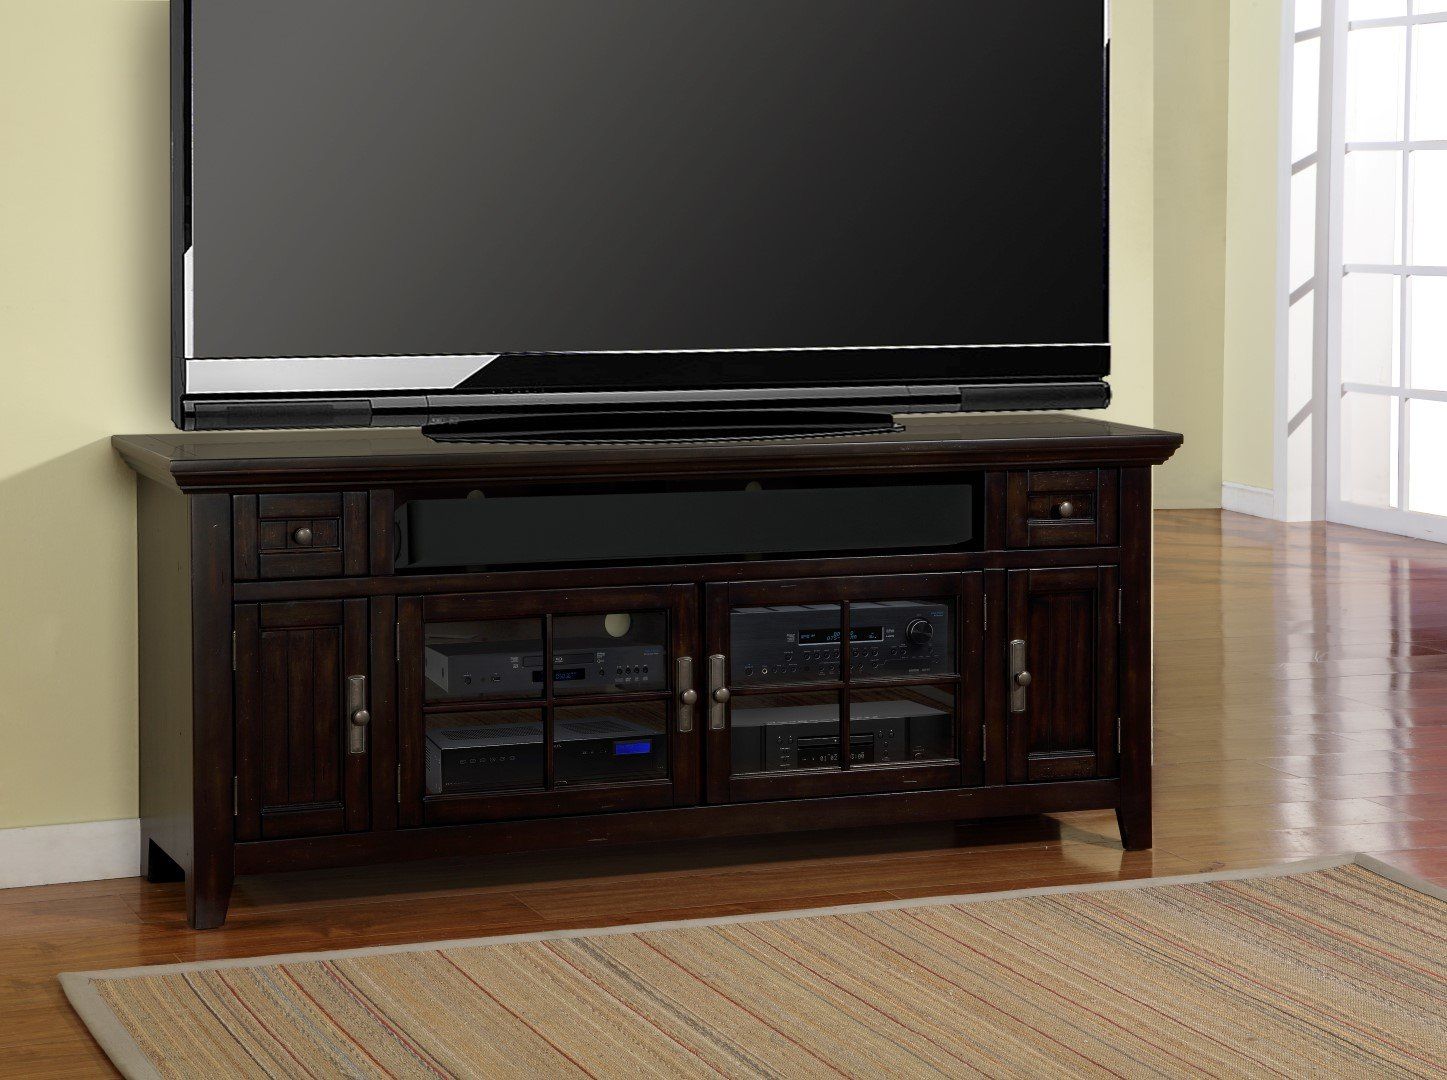 Loon Peak Thayne Tv Stand For Tvs Up To 78" & Reviews | Wayfair Throughout Vista 60 Inch Tv Stands (View 28 of 30)